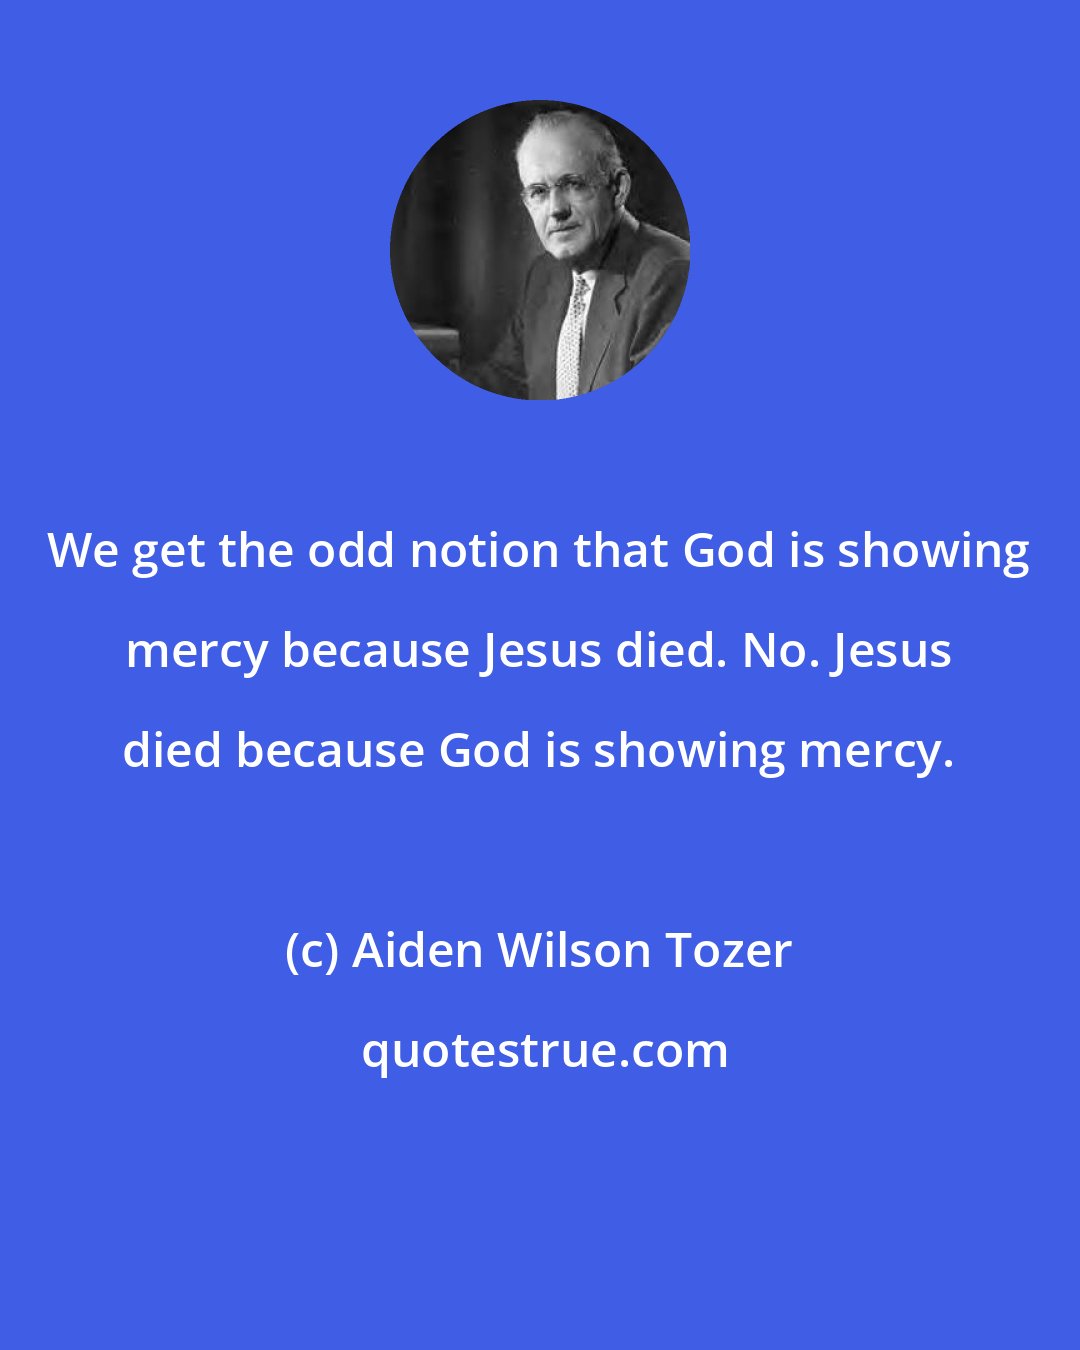 Aiden Wilson Tozer: We get the odd notion that God is showing mercy because Jesus died. No. Jesus died because God is showing mercy.